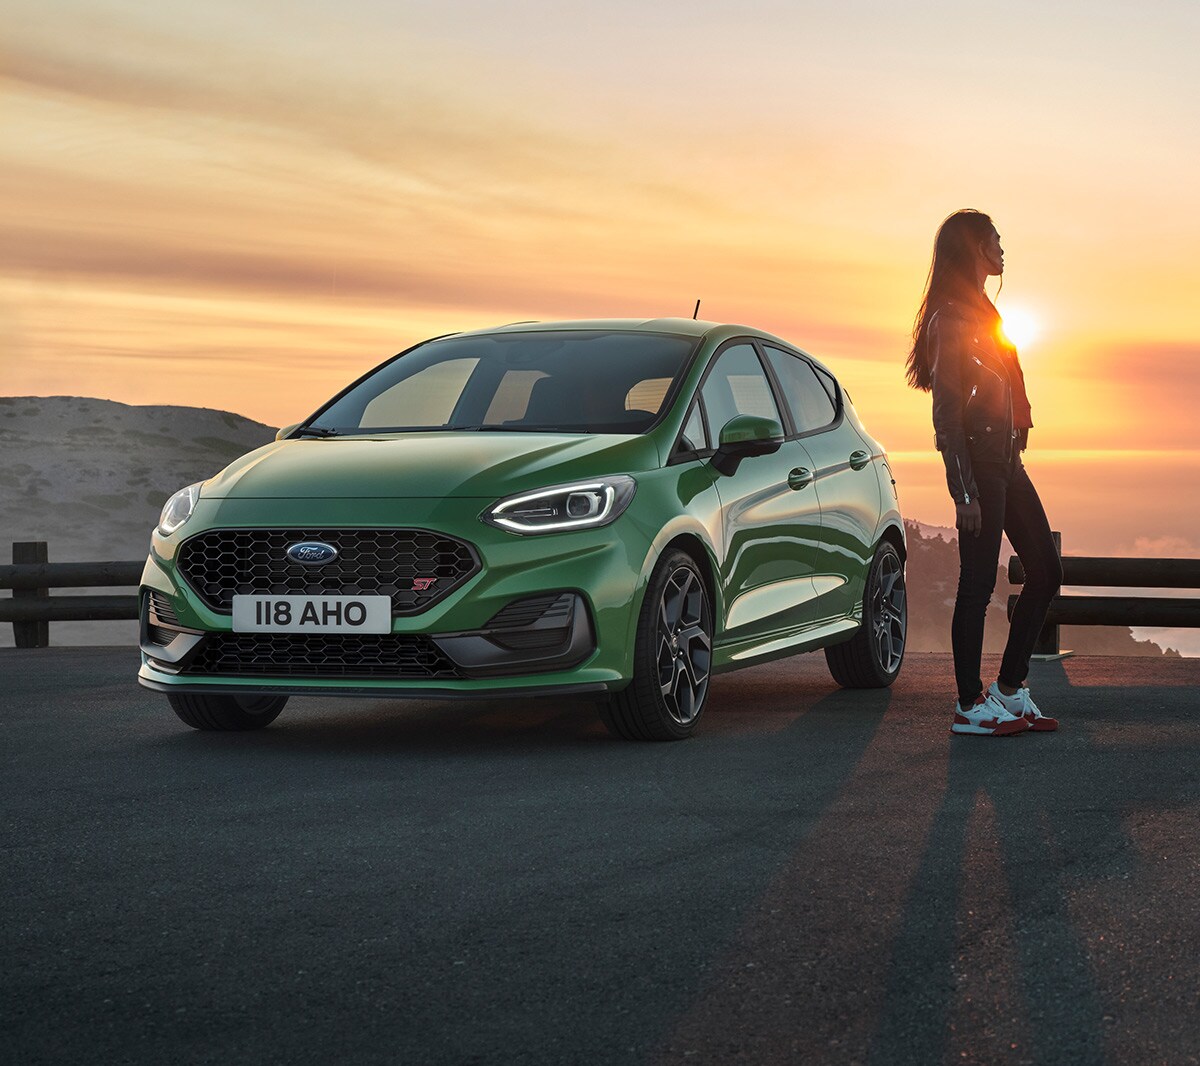 Woman standing next to a Fiesta ST during sunset